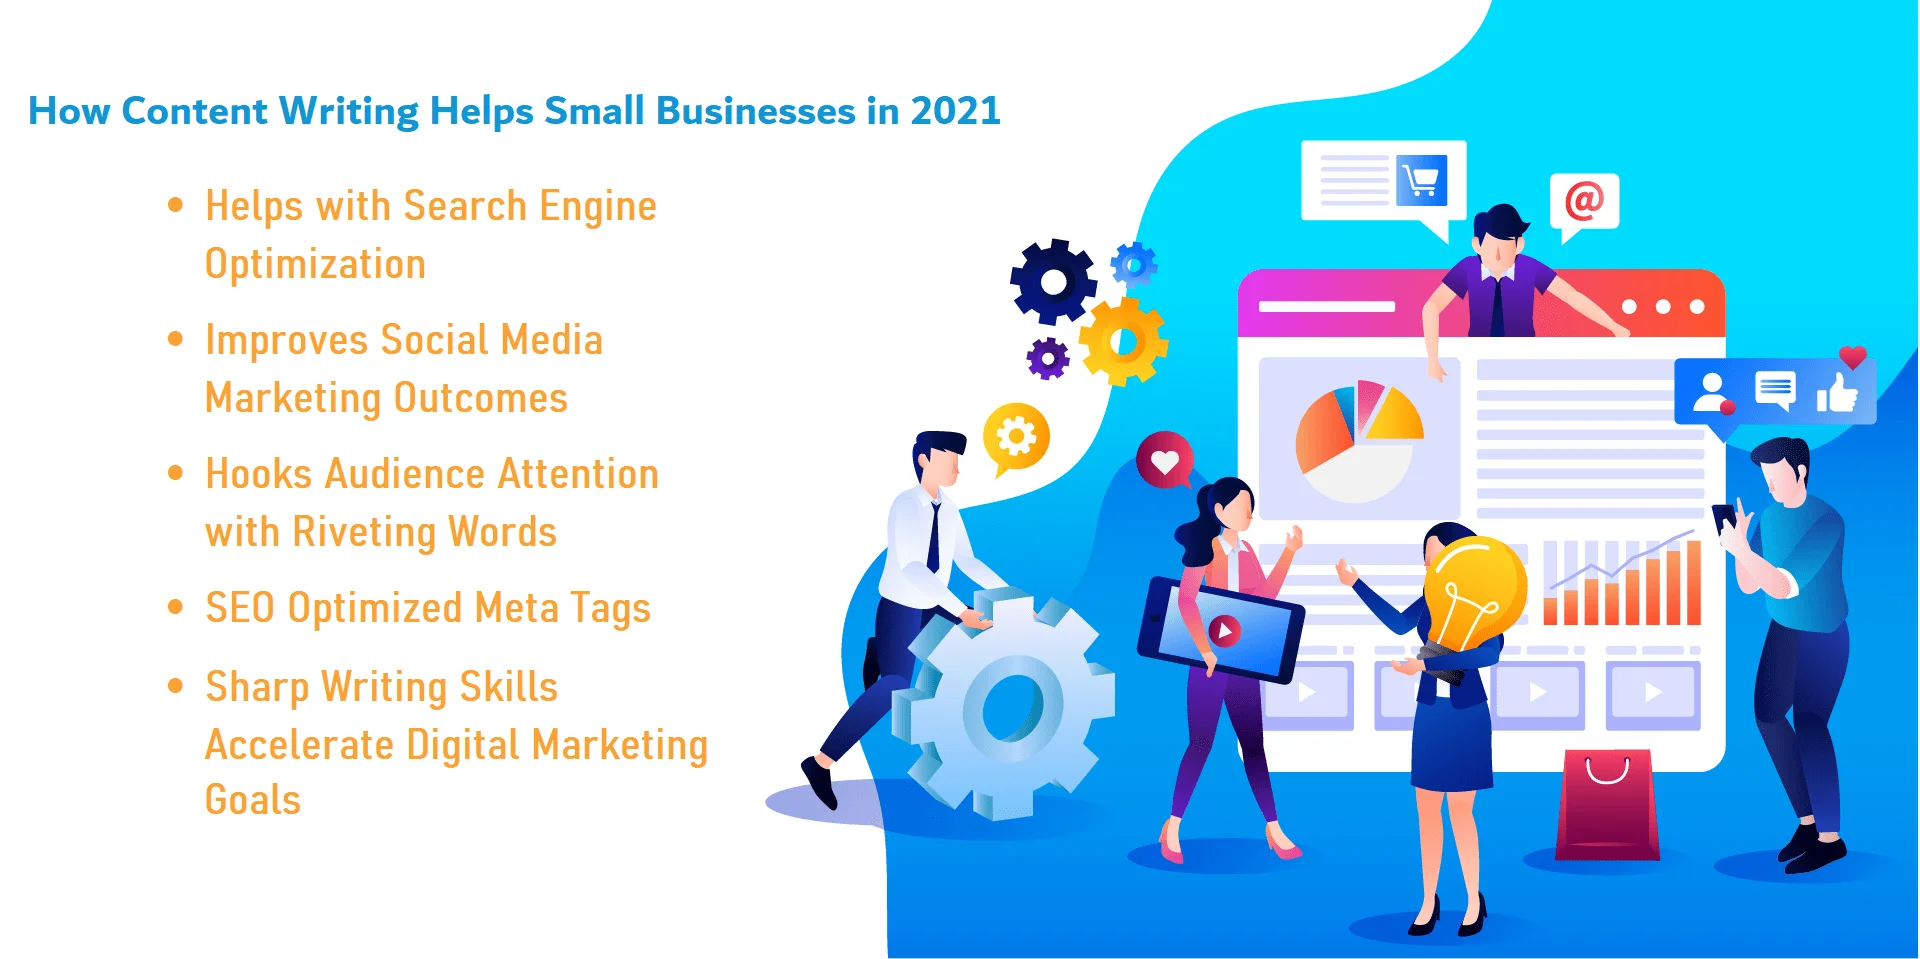 How Content Writing Services Help Small Businesses in 2021